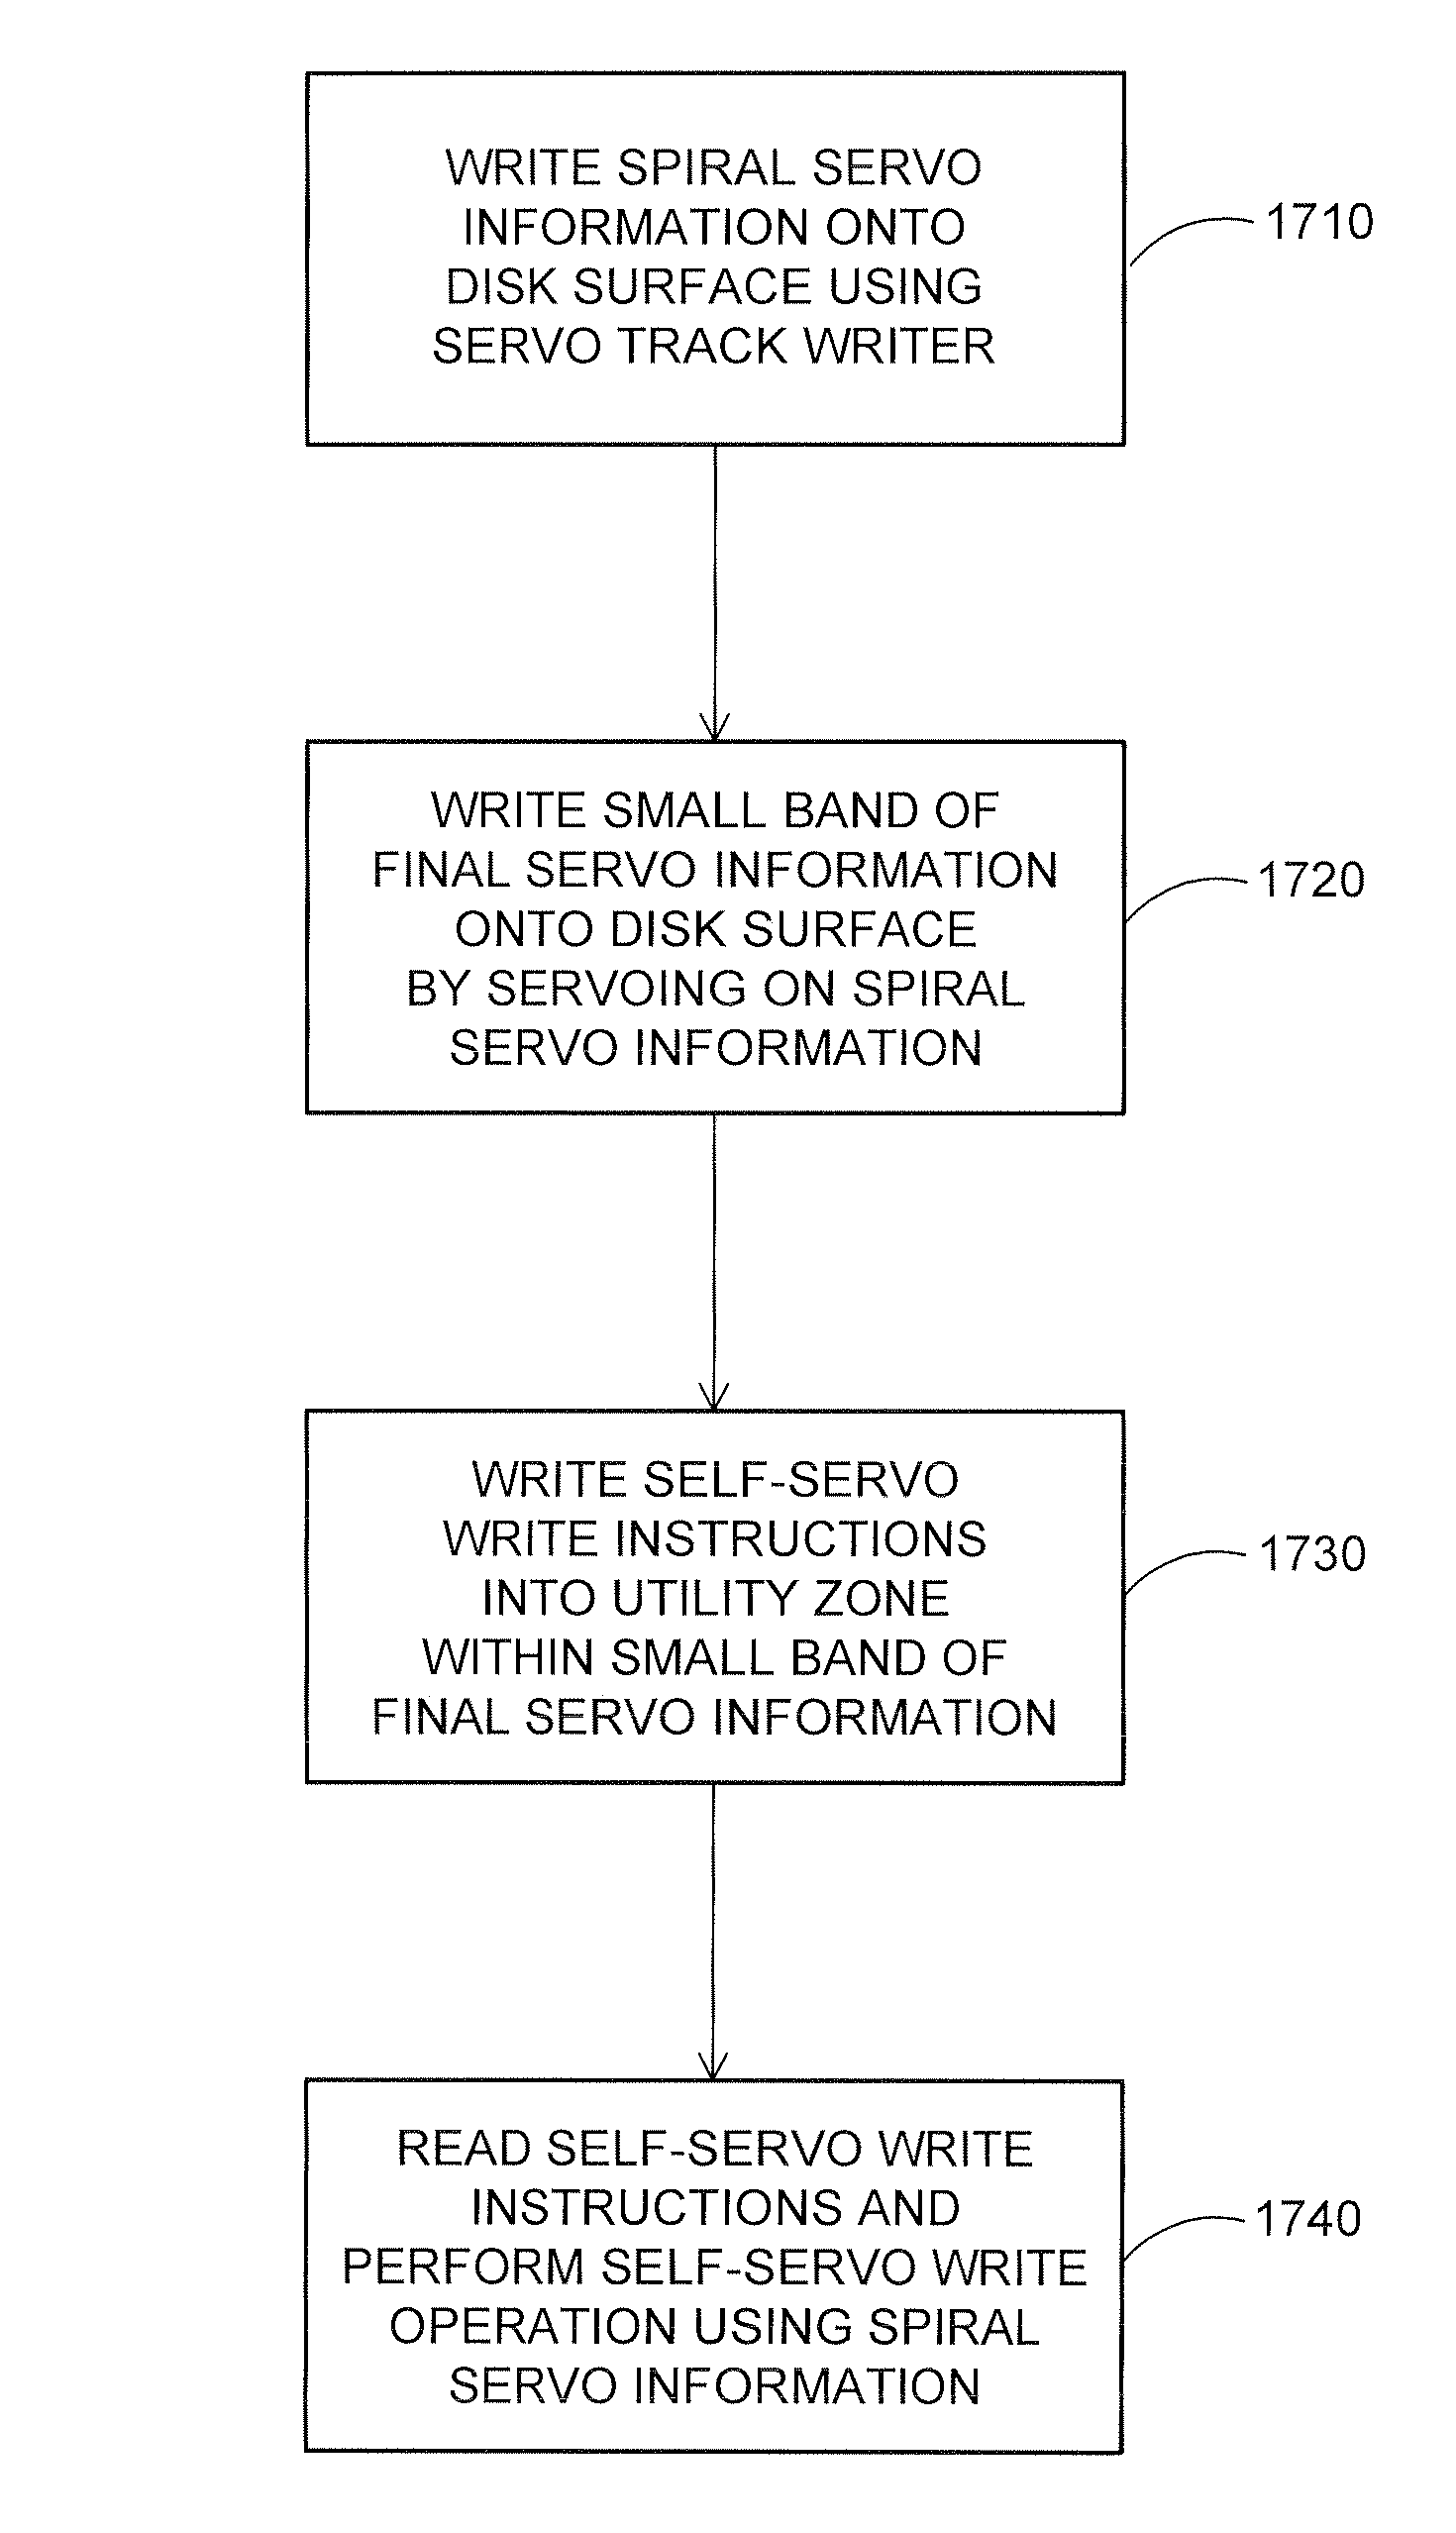 Method and apparatus for performing a self-servo write operation in a disk drive using spiral servo information